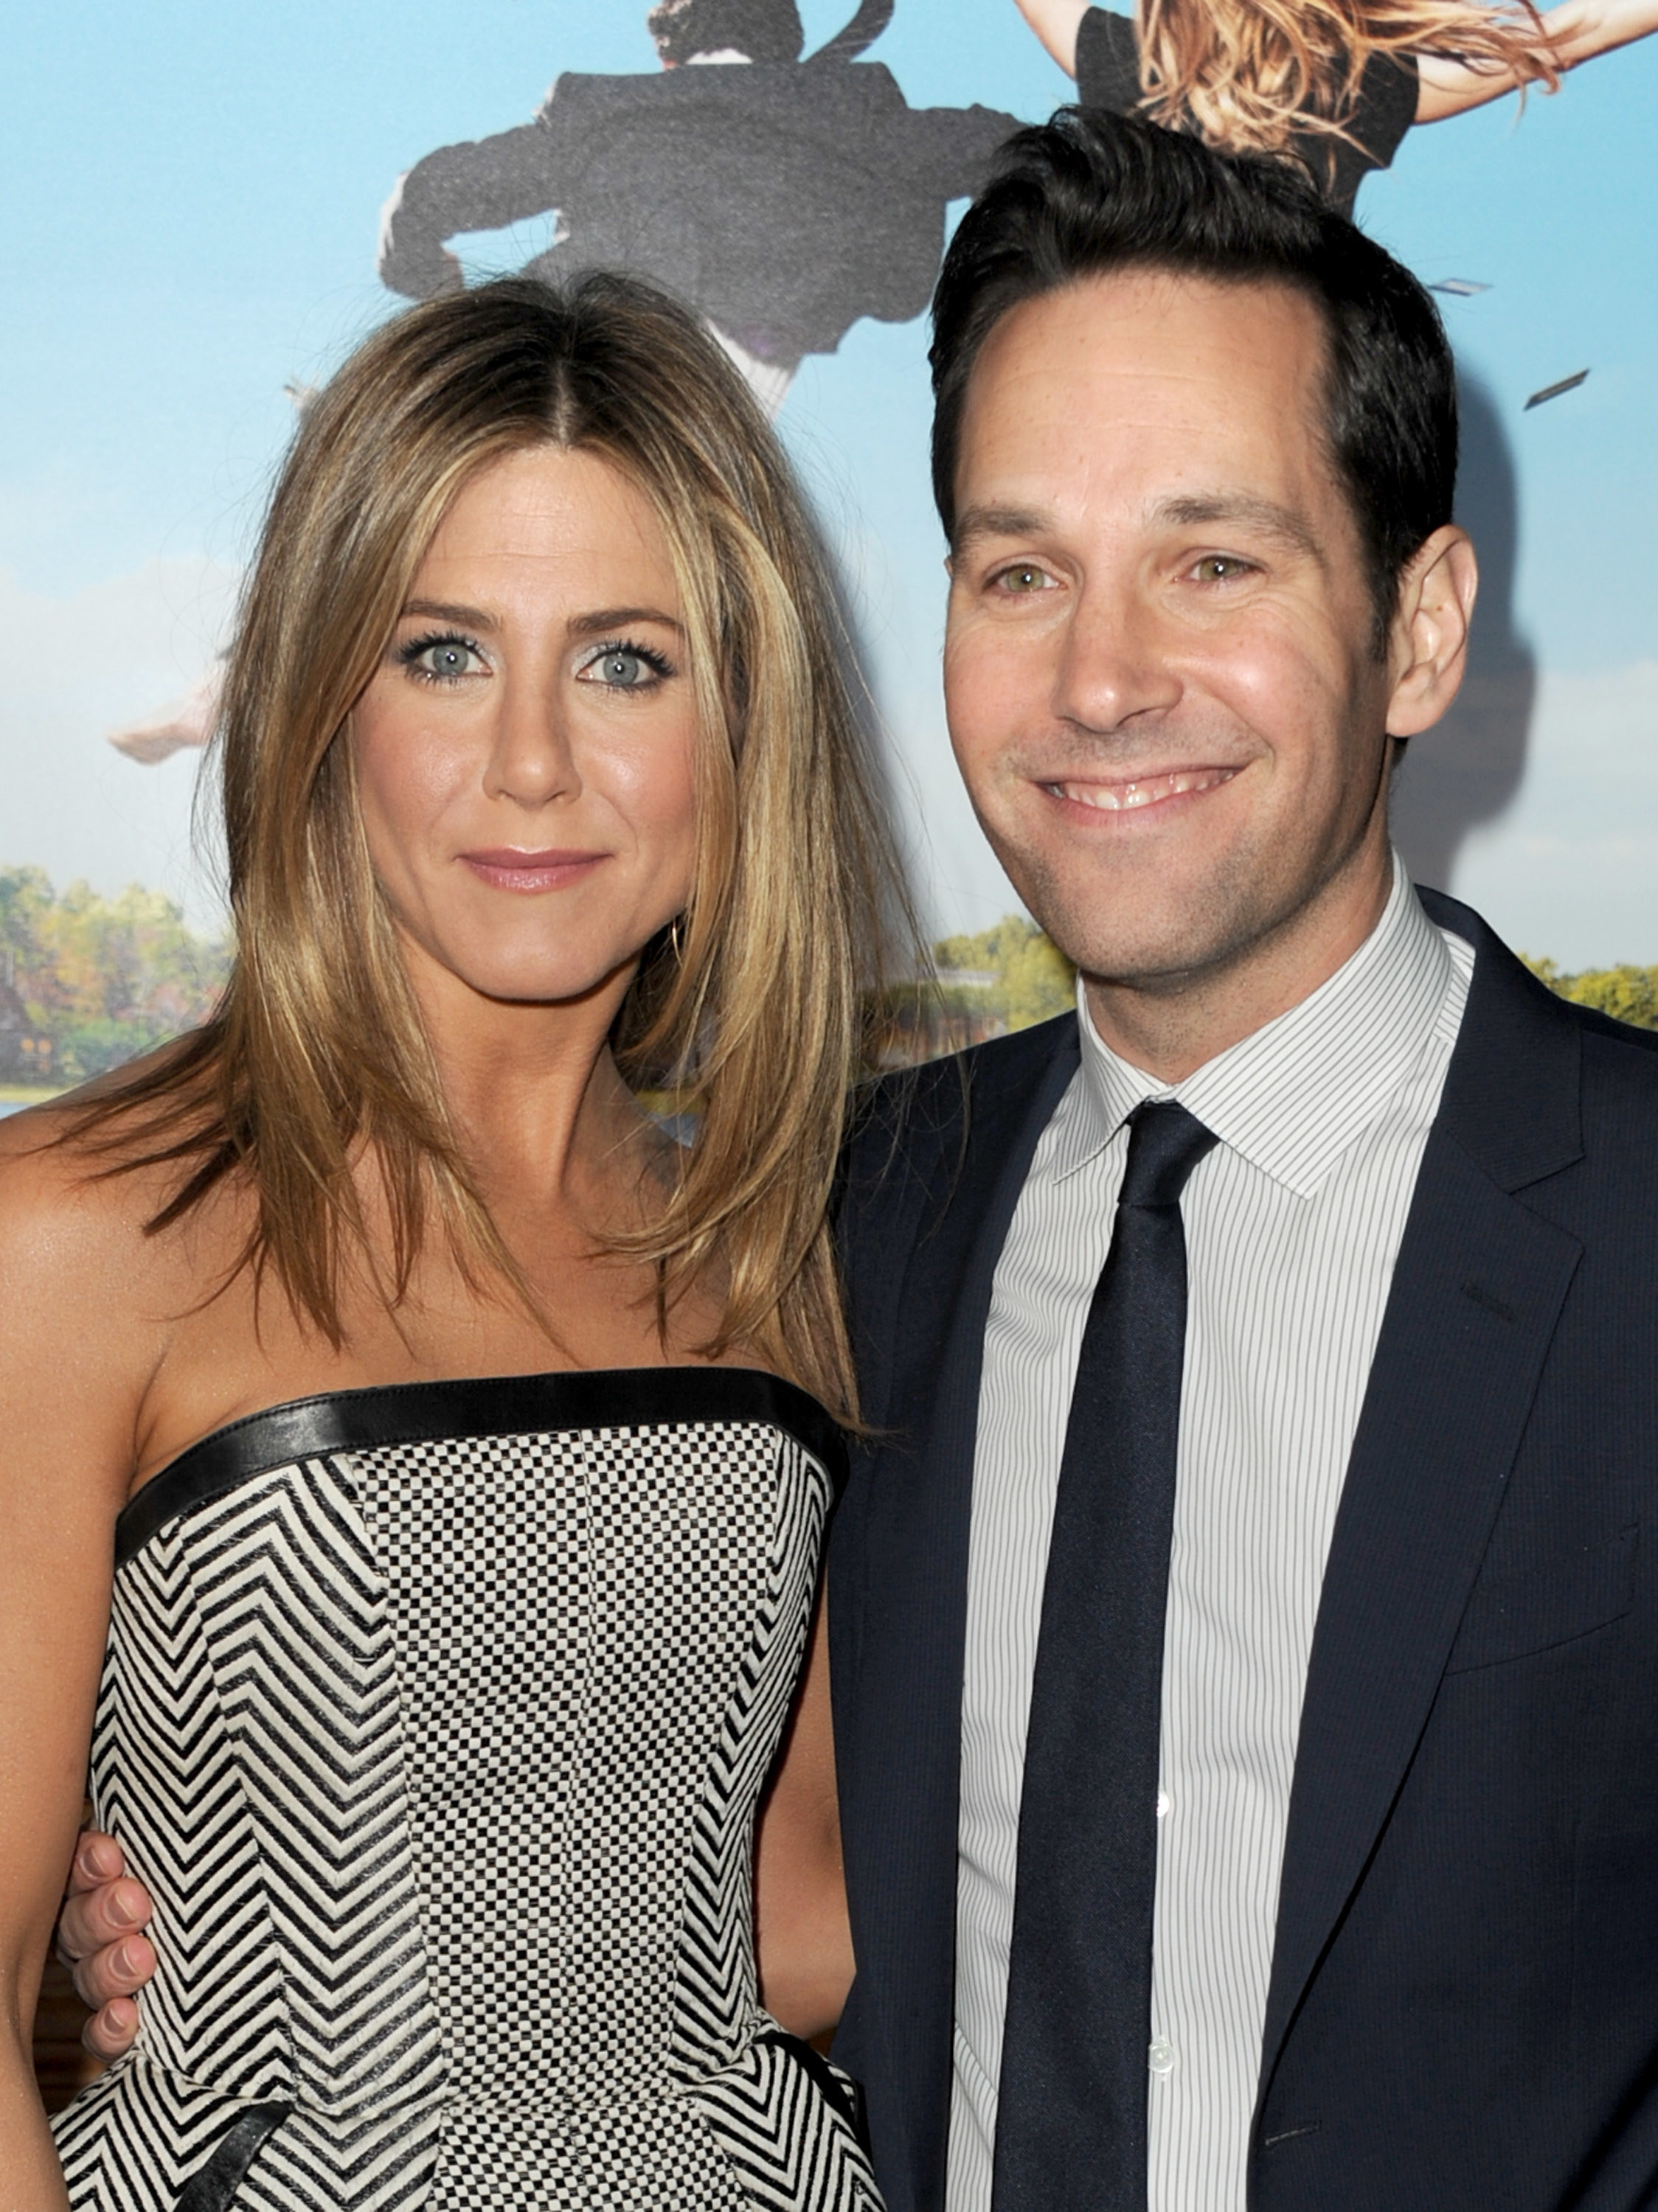 Jennifer Aniston in a two-toned strapless dress standing next to Paul Rudd at the premiere of Wanderlust